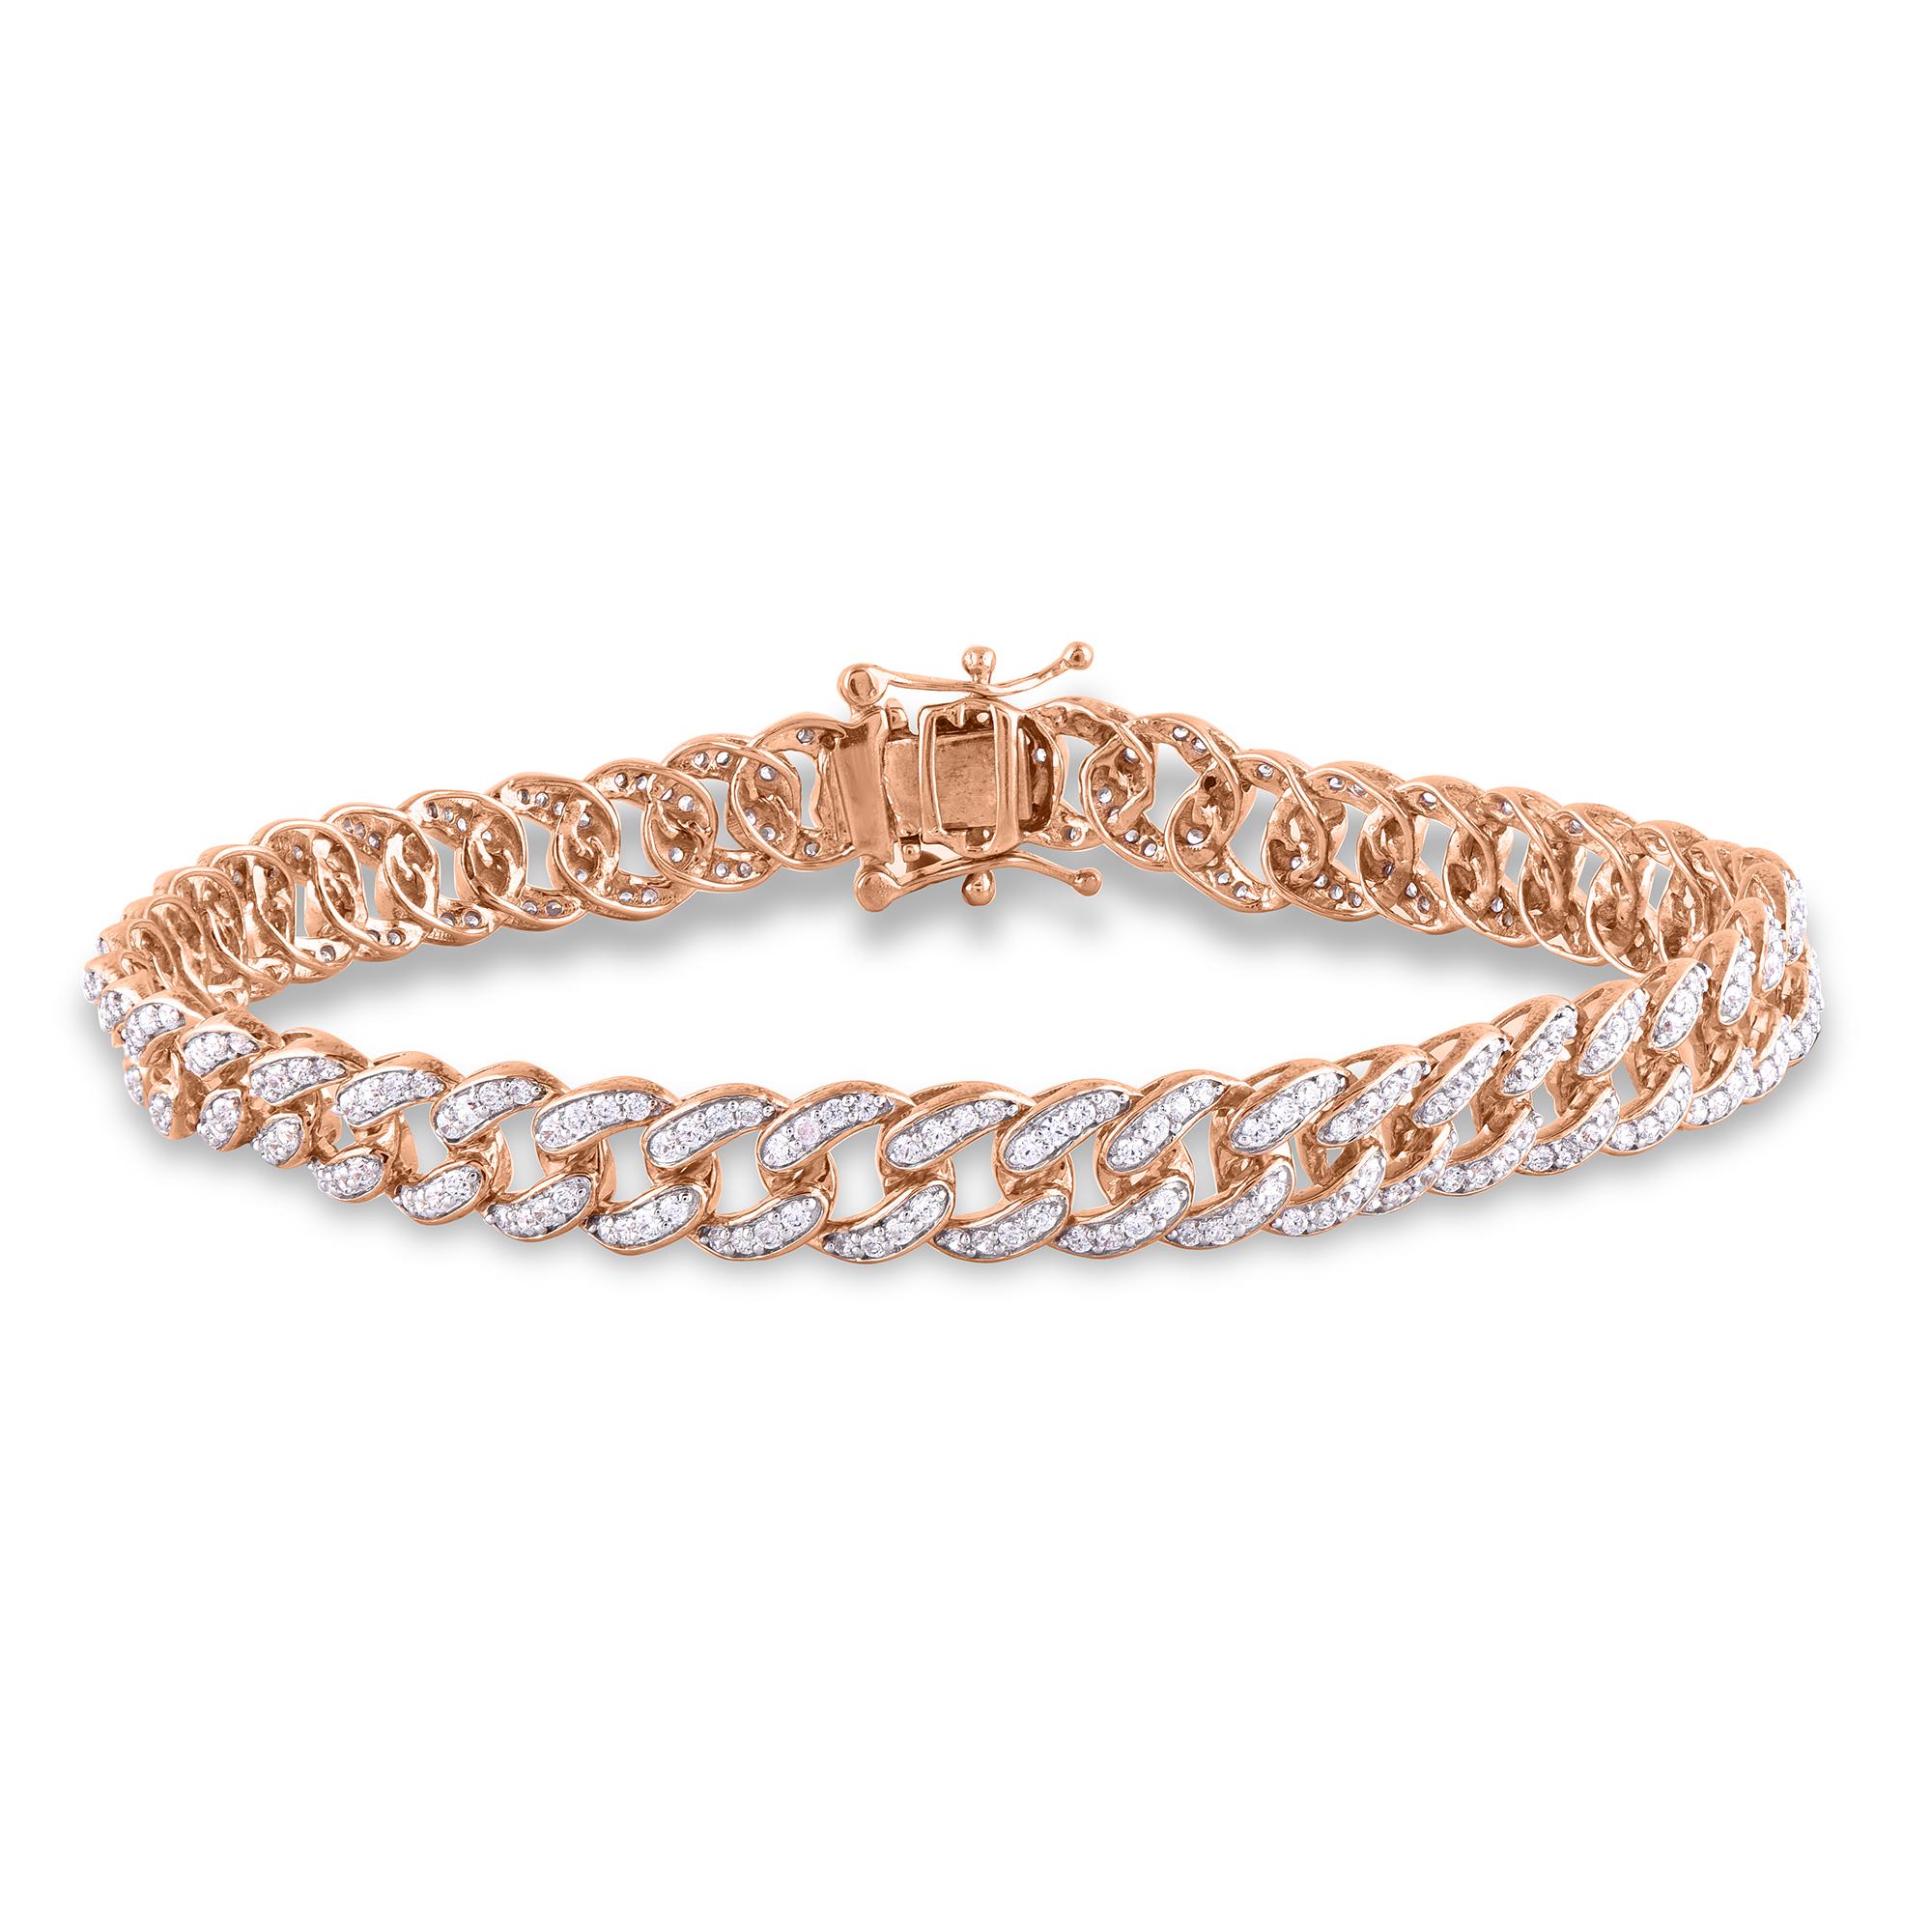 In captivating style, this cable chain bracelet adds an alluring look to any outfit. Expertly handcrafted by our inhouse experts in 14 karat yellow gold and studded with 355 round brilliant diamond set in pave setting. The total diamond weight is